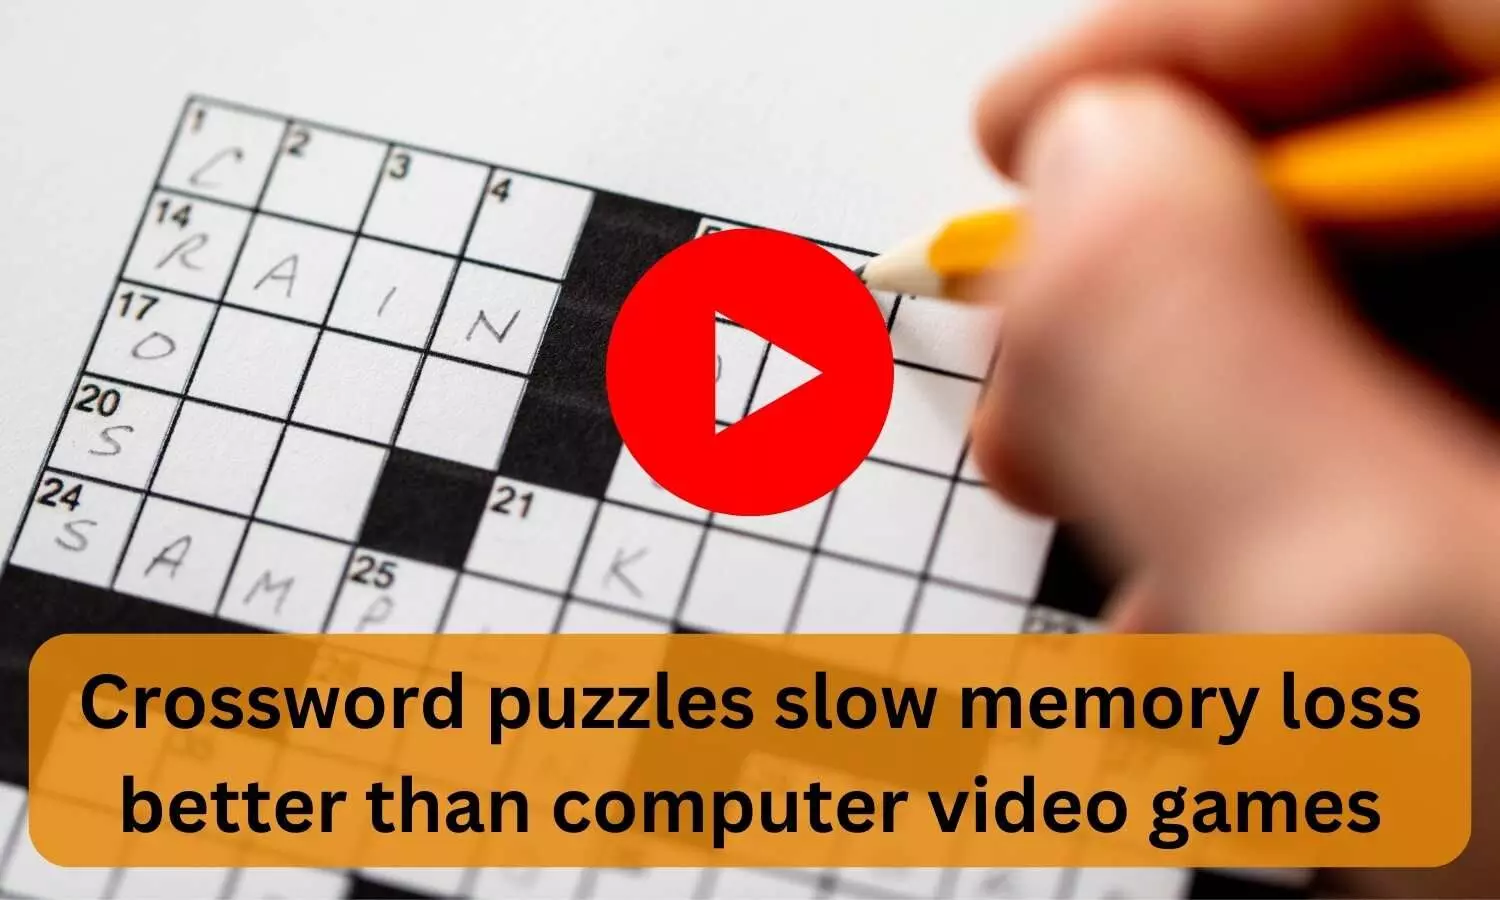 Crossword puzzles slow memory loss better than computer video games